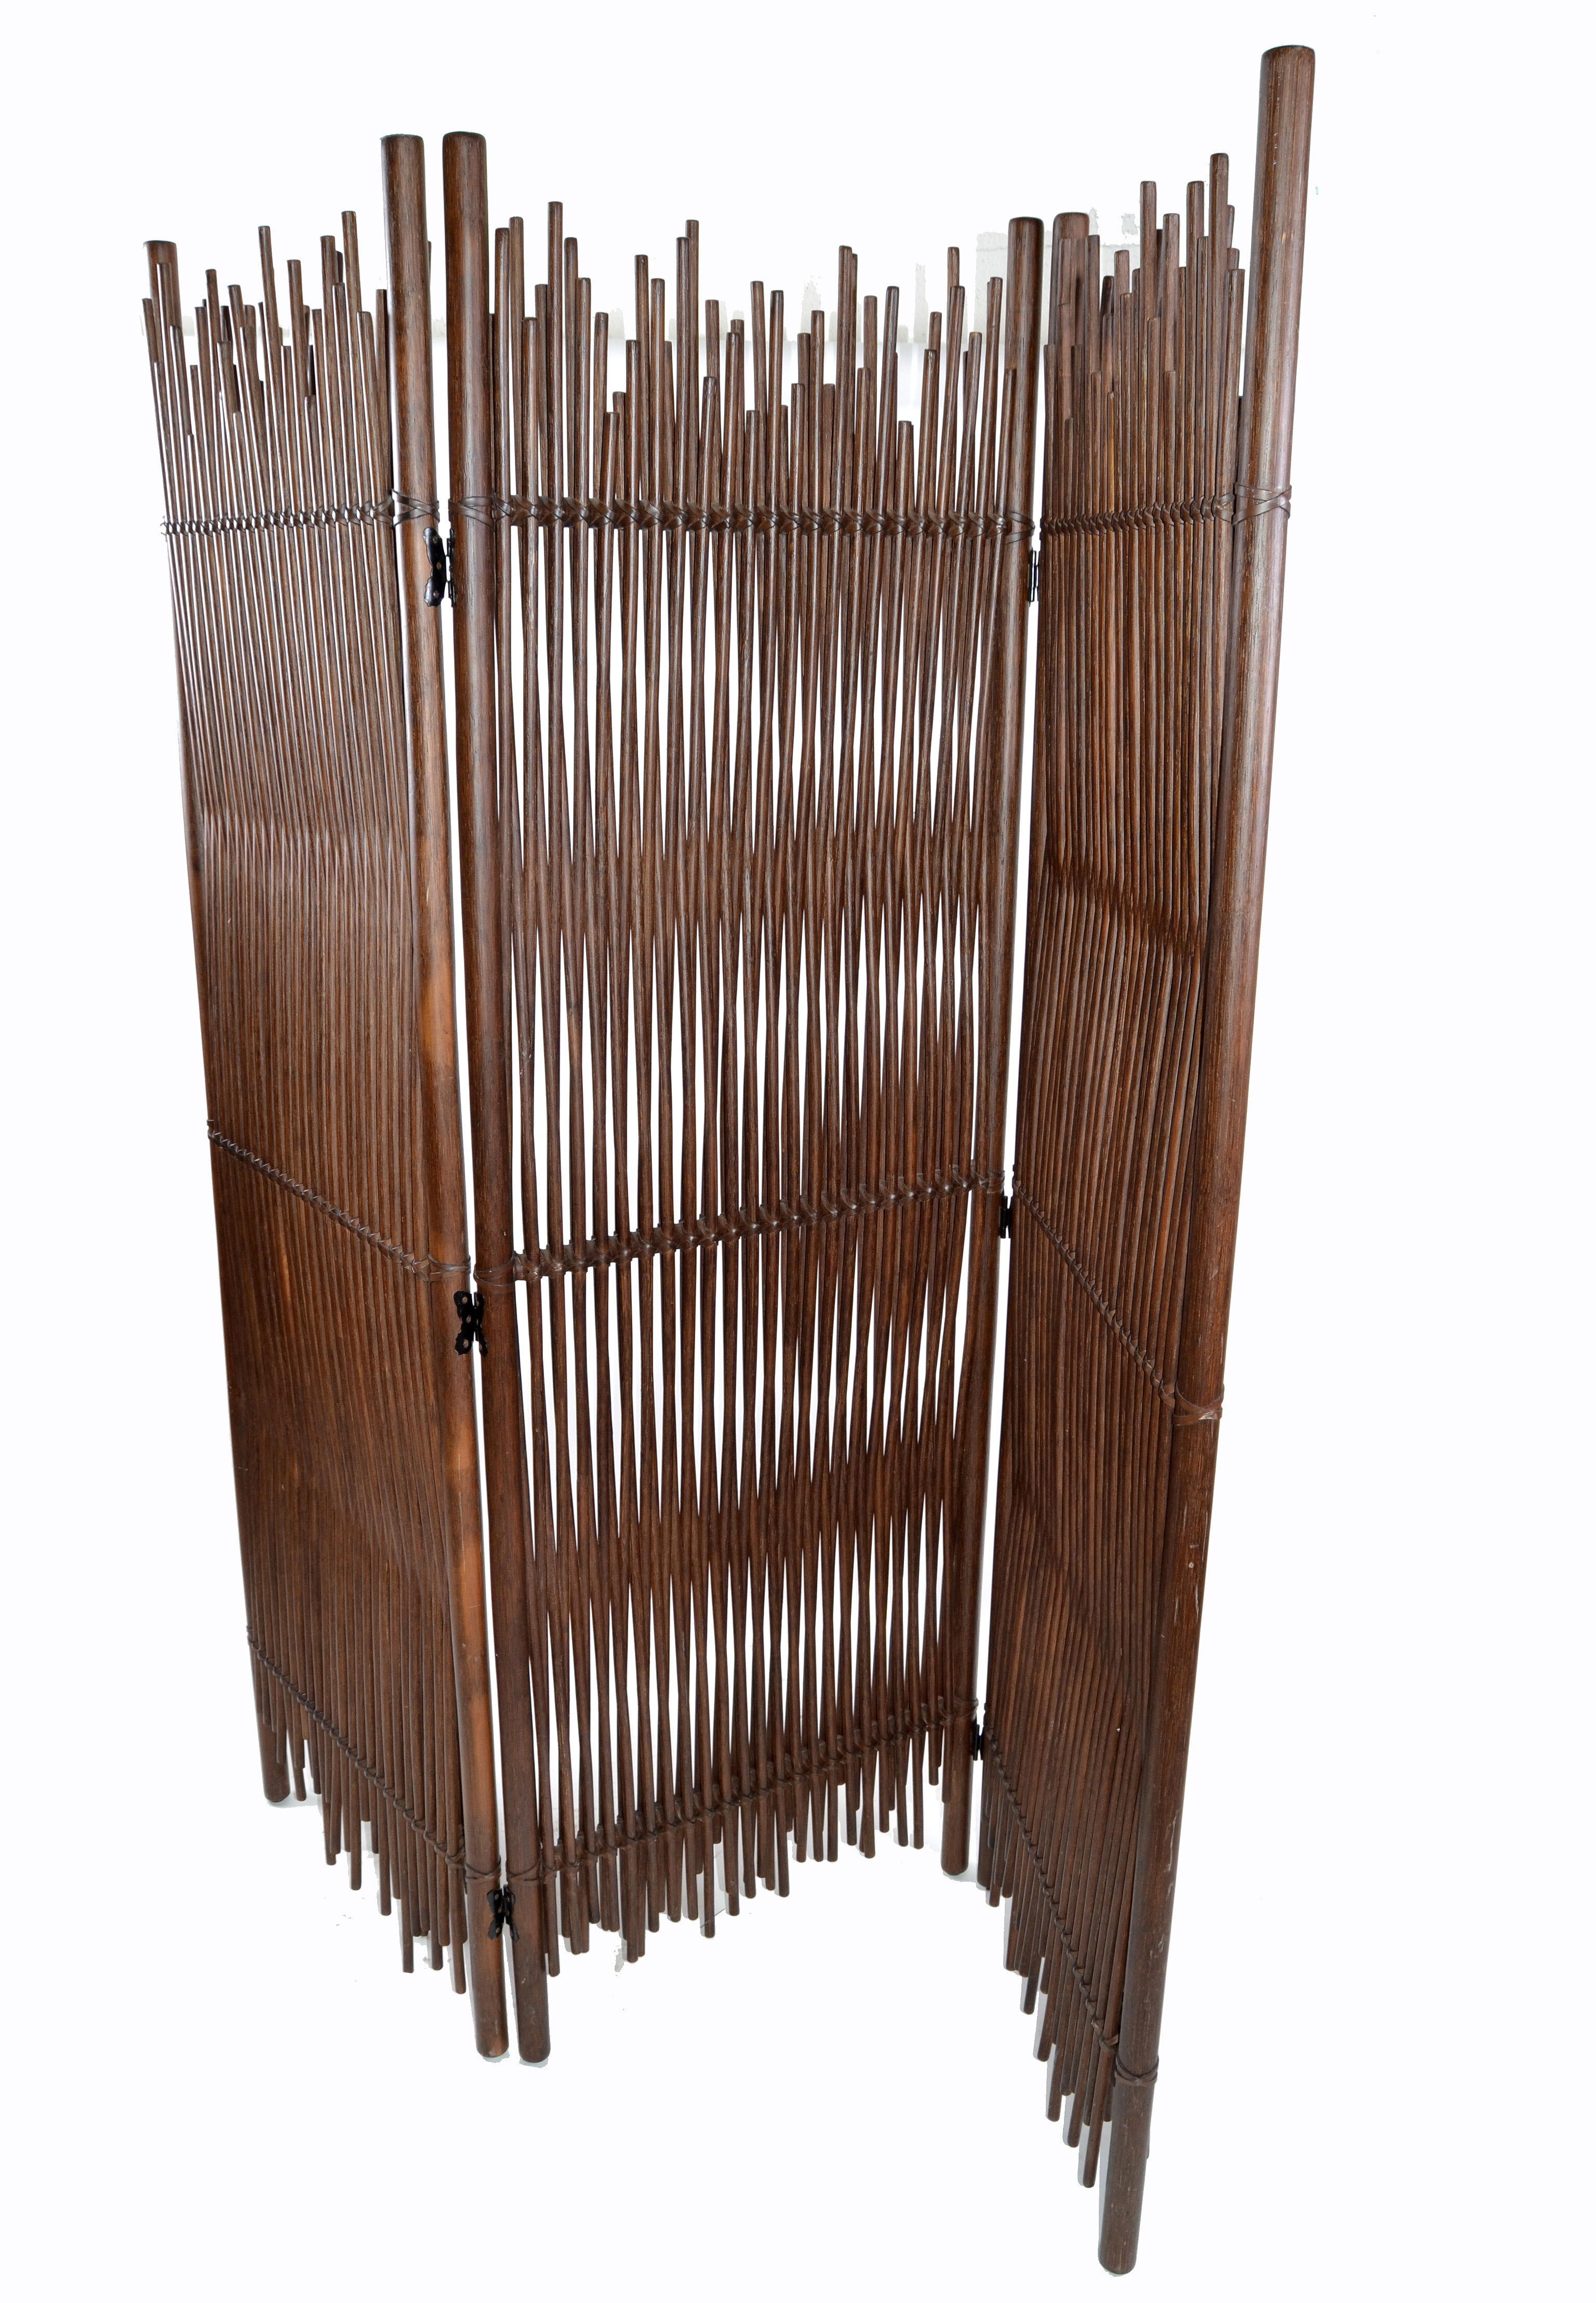 Mid-Century Modern tall three double wall-panel solid bamboo wood room divider in dark brown finish, comes from Italy.
Heavy and very well crafted with leather cross bindings and butterfly hinges.
Dimensions closed:
Width 24 inches, depth 6 inches,